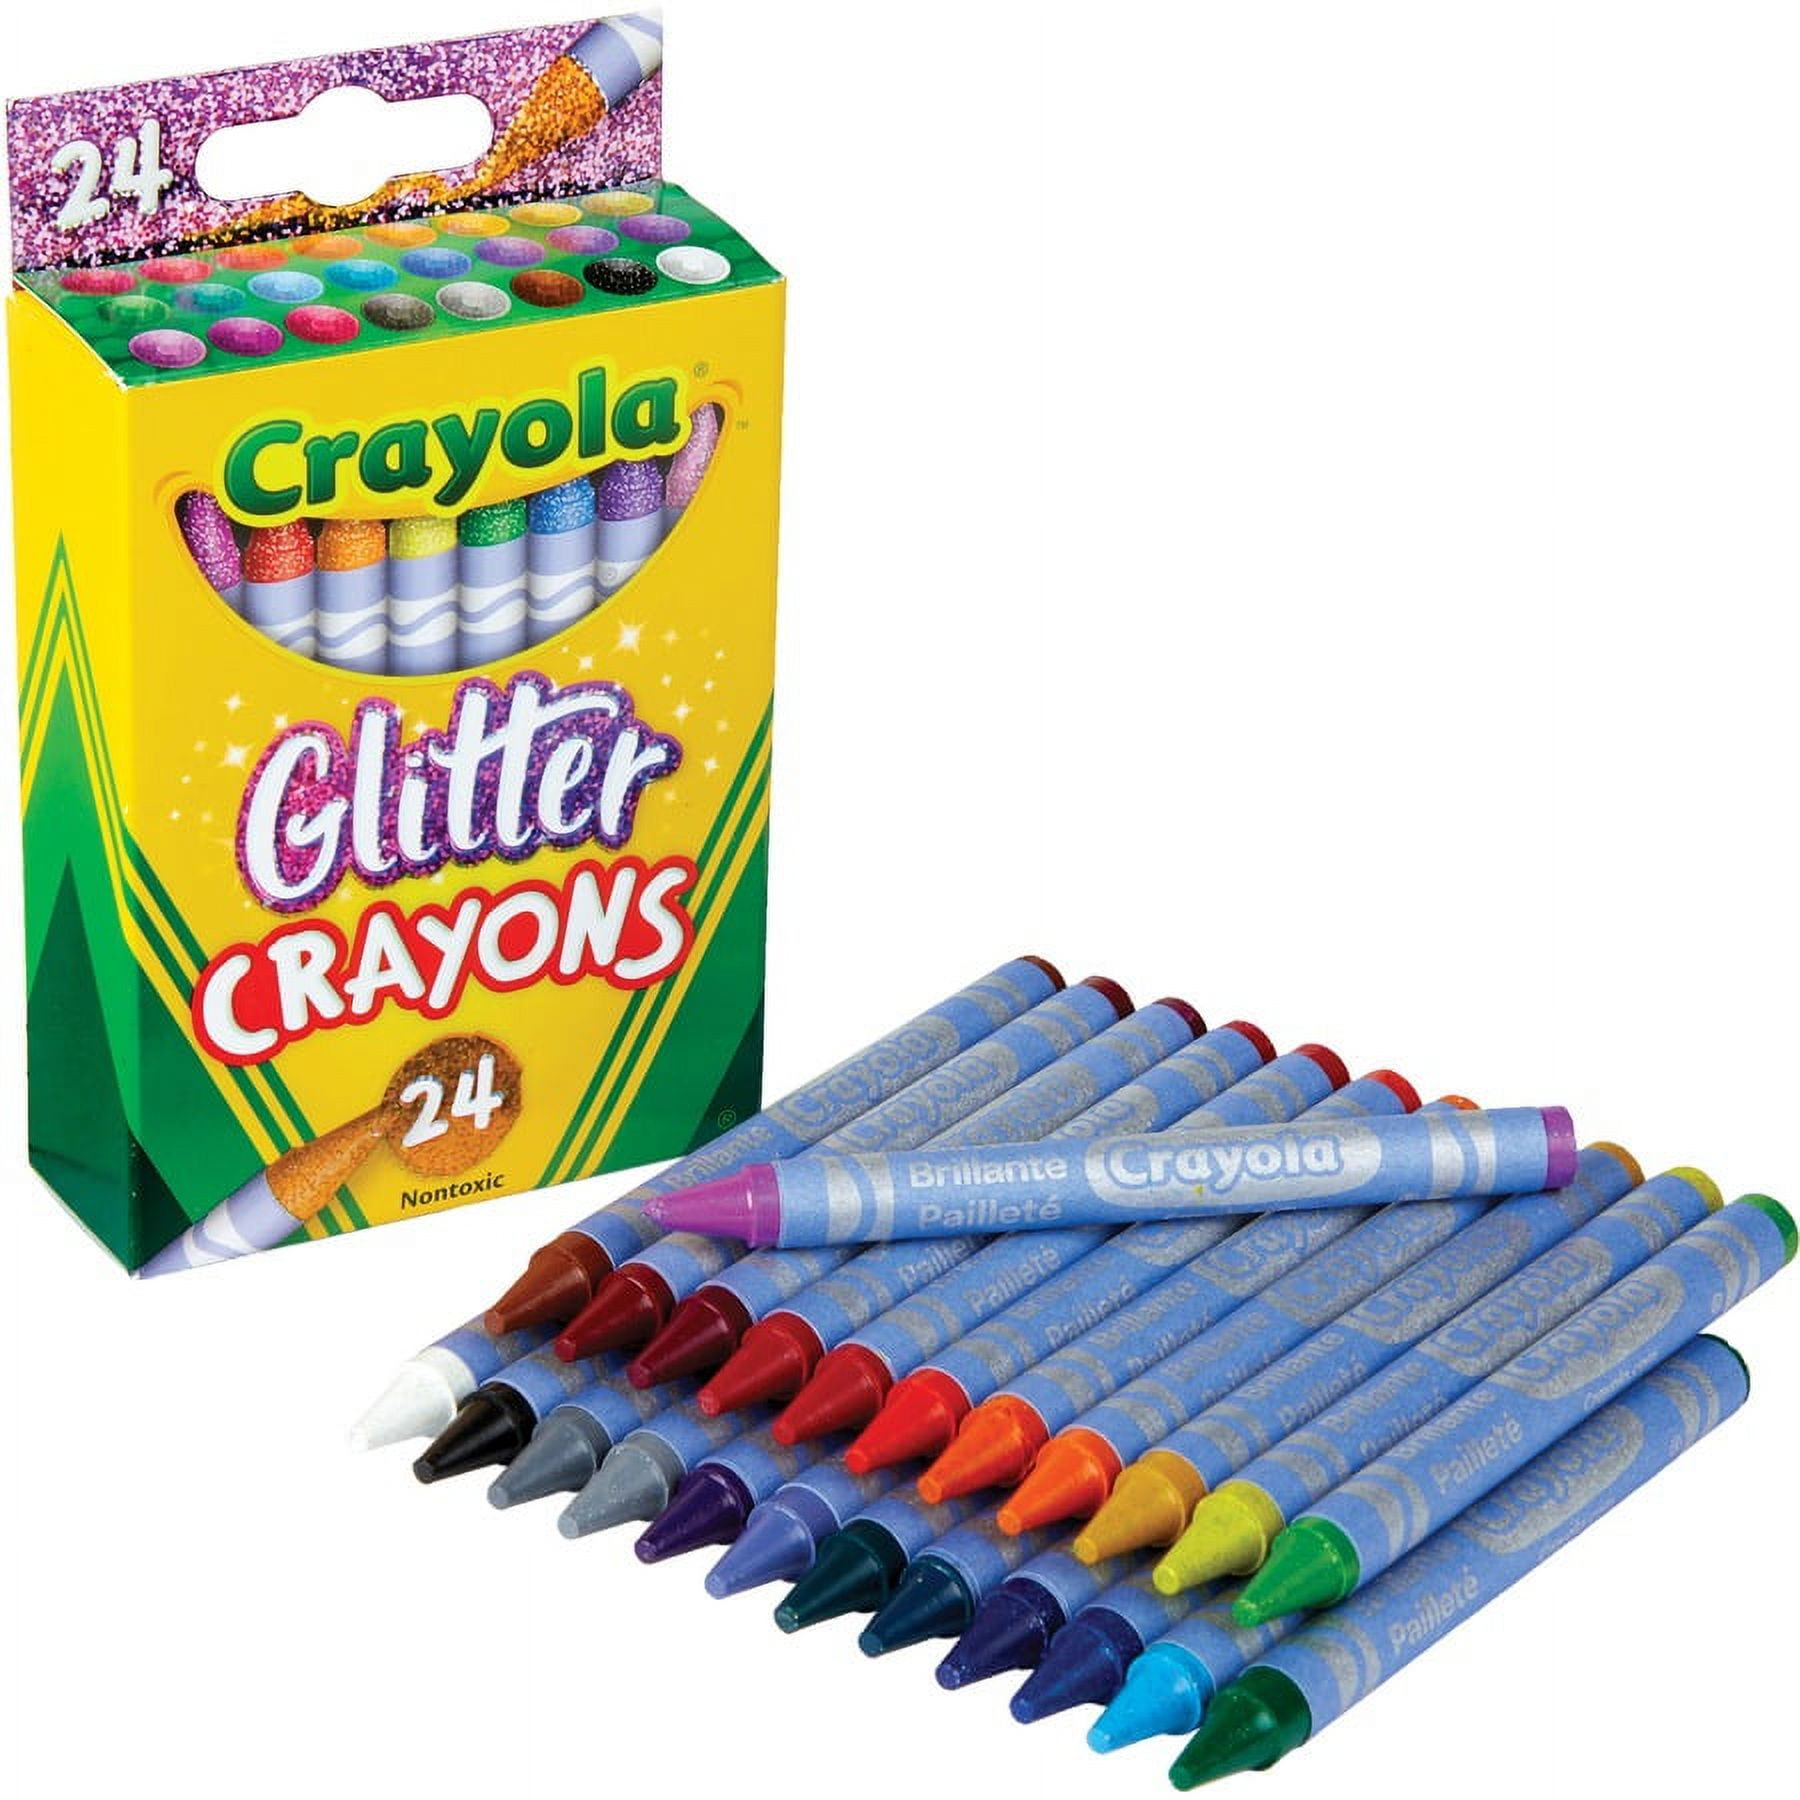 Buy Crayola Crayons, 24 Count, Glitter Crayons, 16 Count, Includes 5  Color Flag Set Online at Lowest Price Ever in India